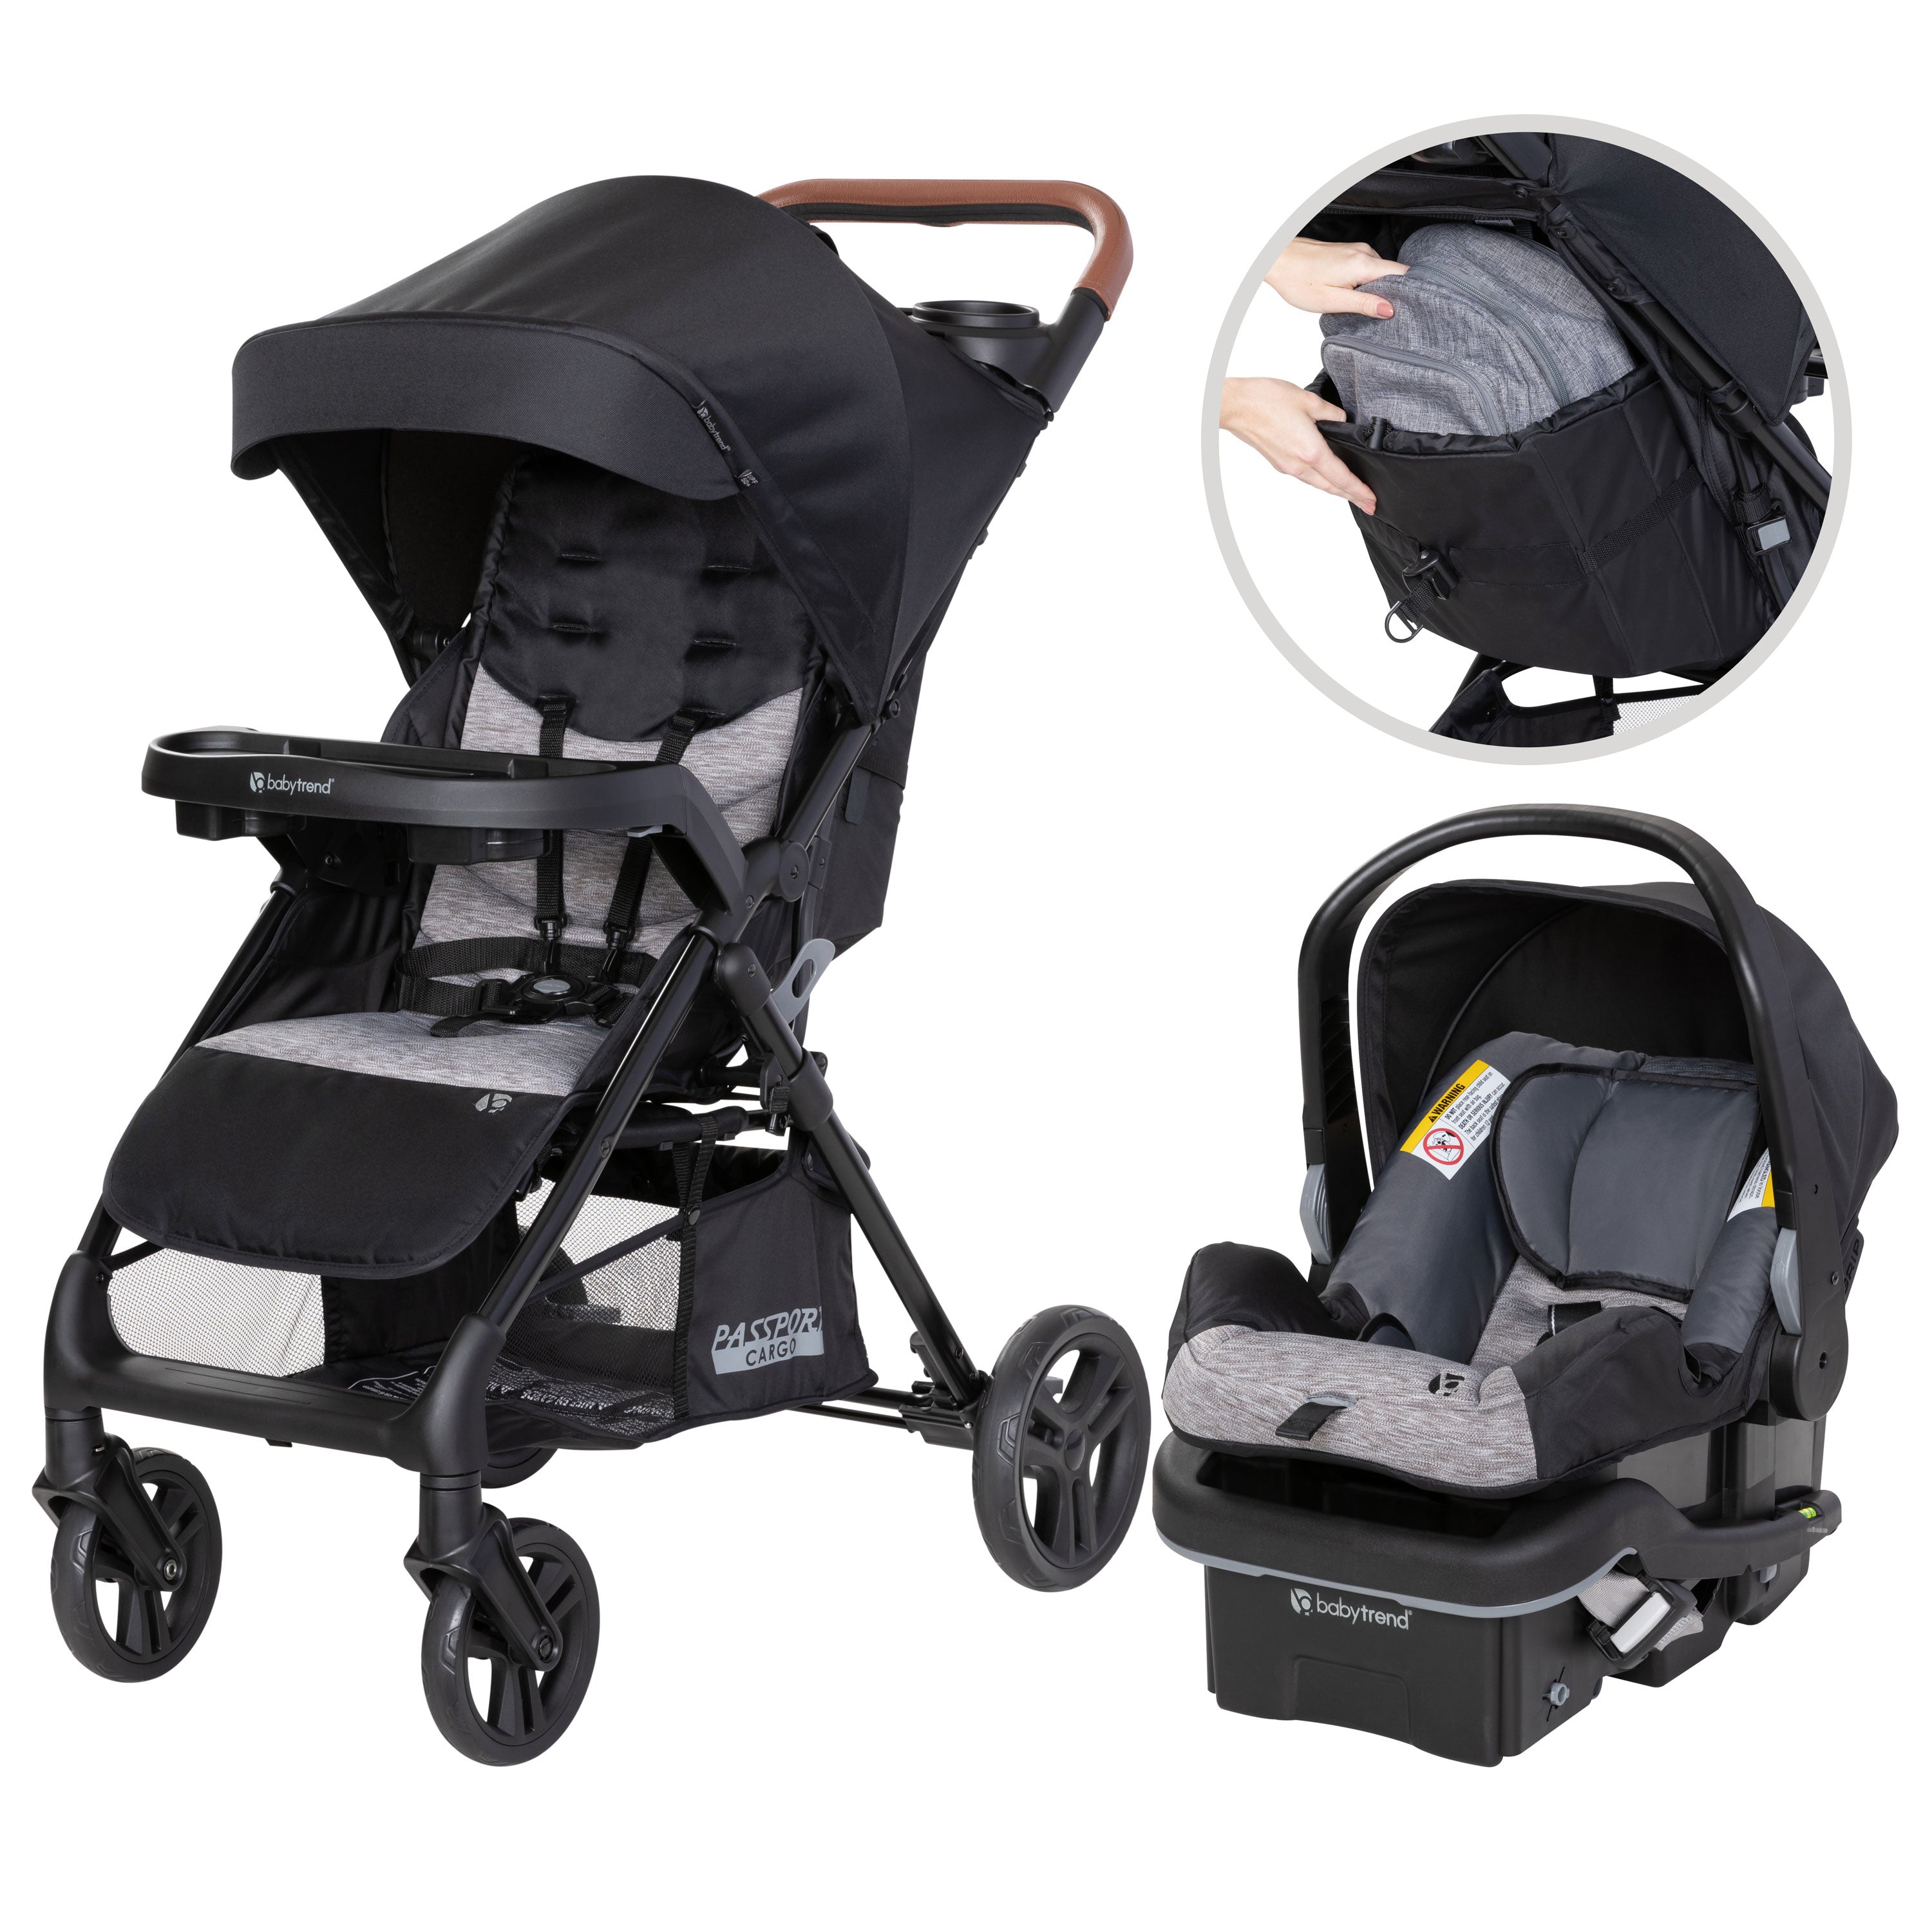 Baby Trend Passport Cargo Stroller Travel System with EZ-Lift 35 PLUS Infant Car Seat with extra storage pouch on the back of child seat